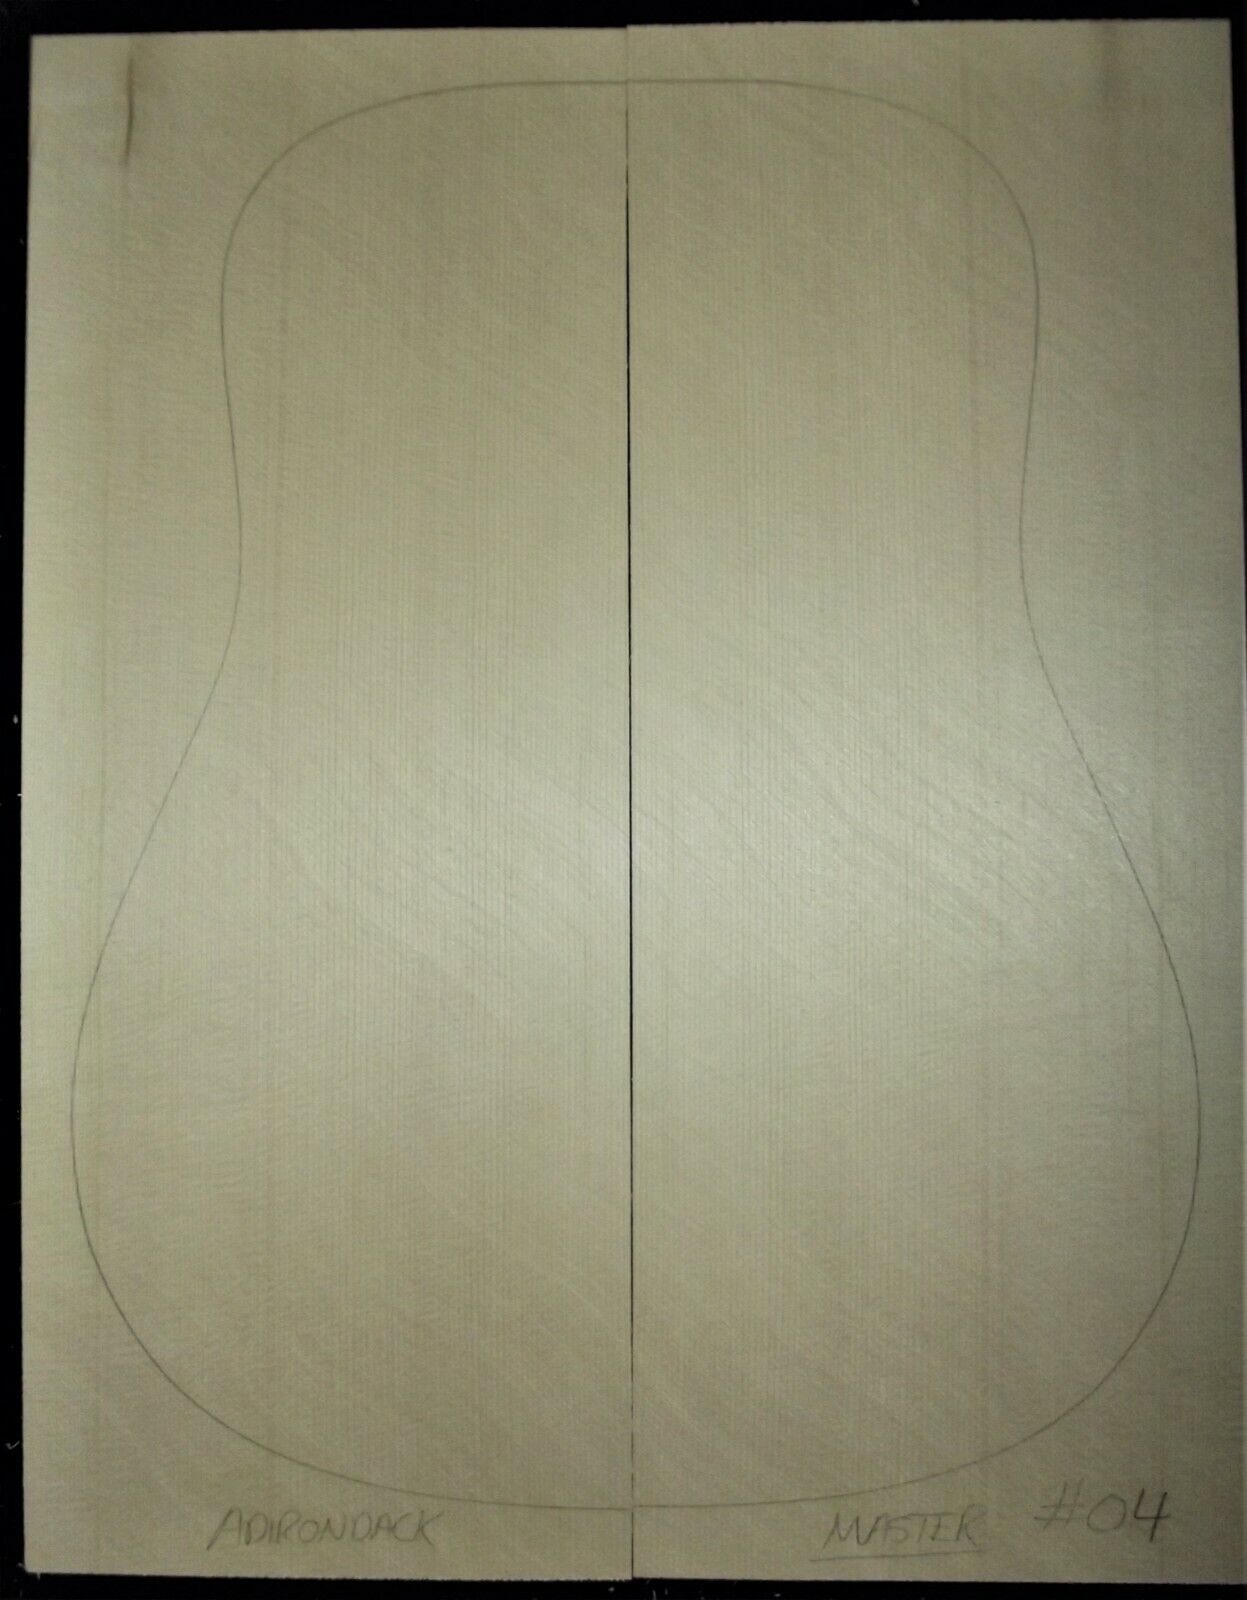 Guitar Luthier Tonewood Opening large release sale MASTERGRADE ADIRONDACK TOP outlet SPRUCE RED SO